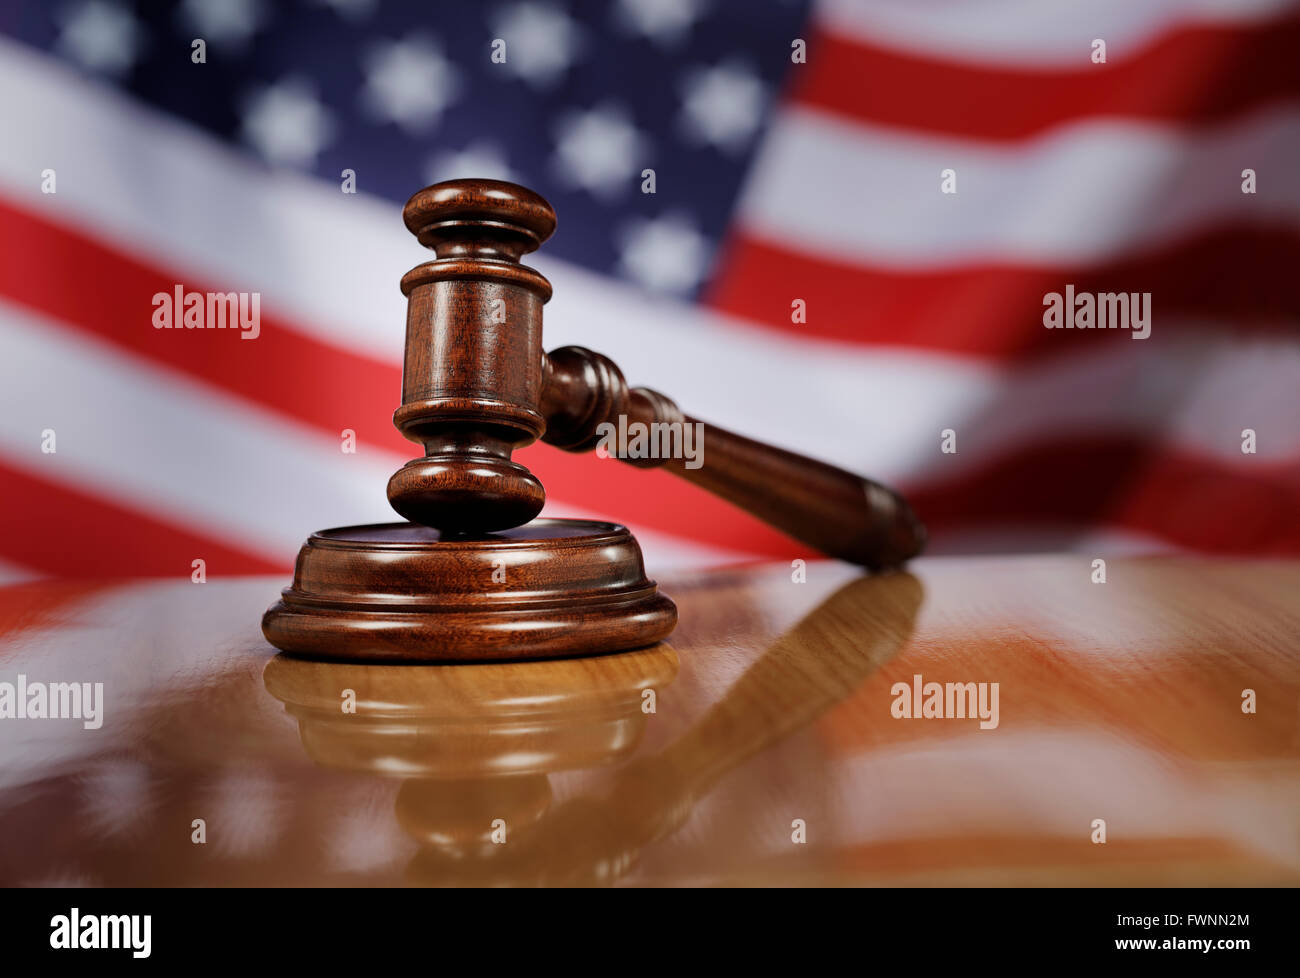 Mahogany wooden gavel on glossy wooden table, USA flag in the background. Stock Photo